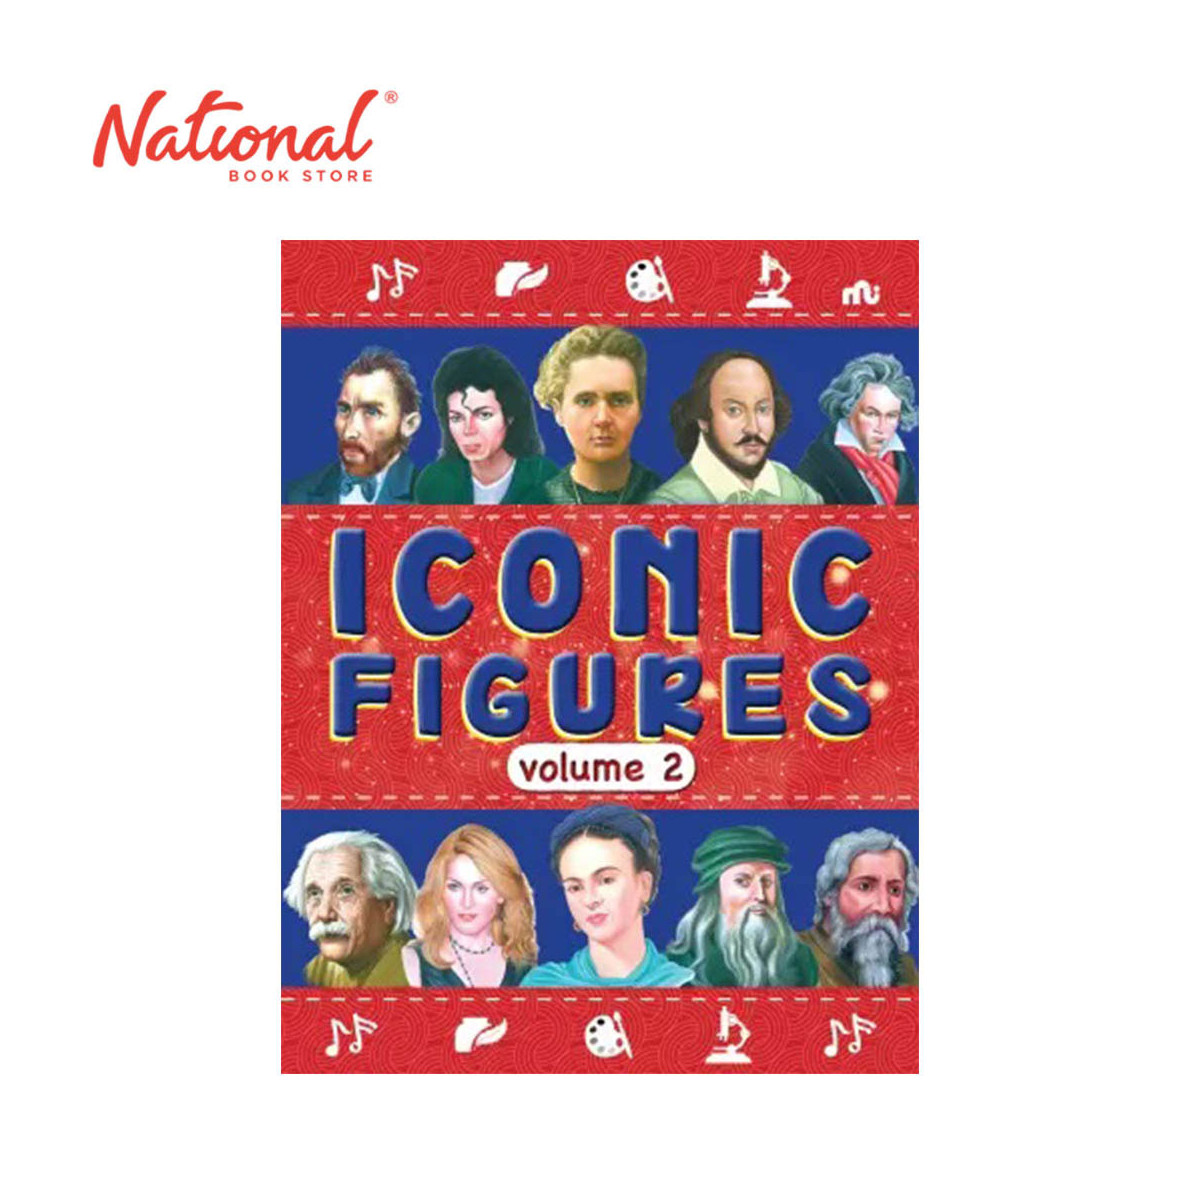 Iconic Figures Volume 2 - Trade Paperback - Chidren's Reference Books